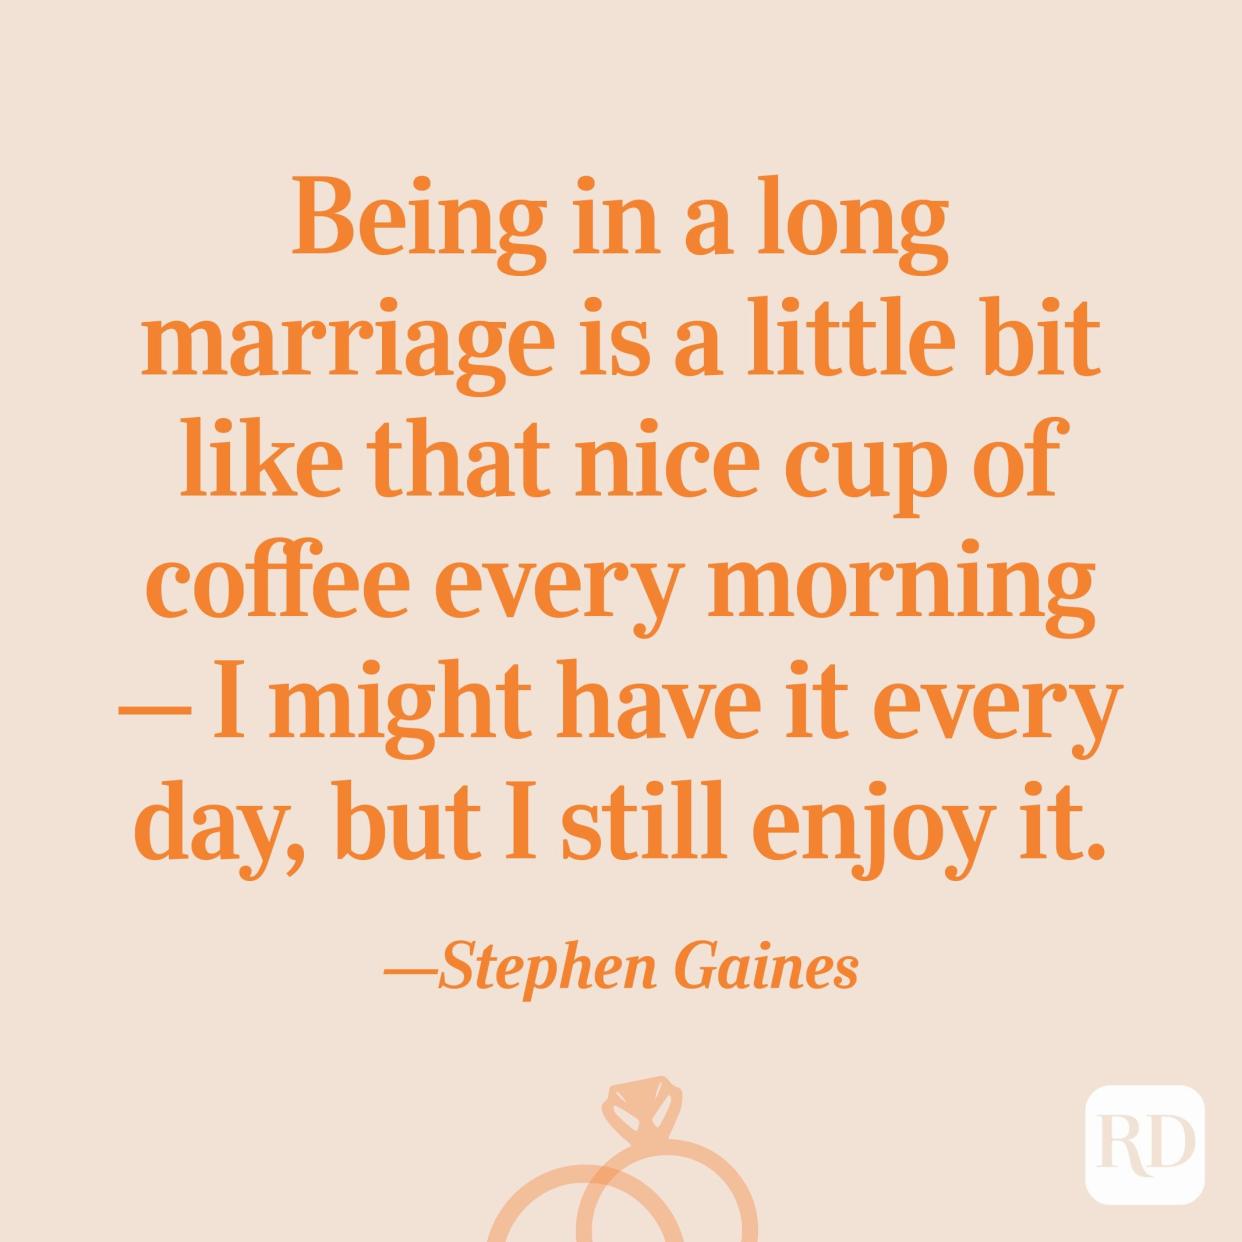 “Being in a long marriage is a little bit like that nice cup of coffee every morning – I might have it every day, but I still enjoy it.”—Stephen Gaines